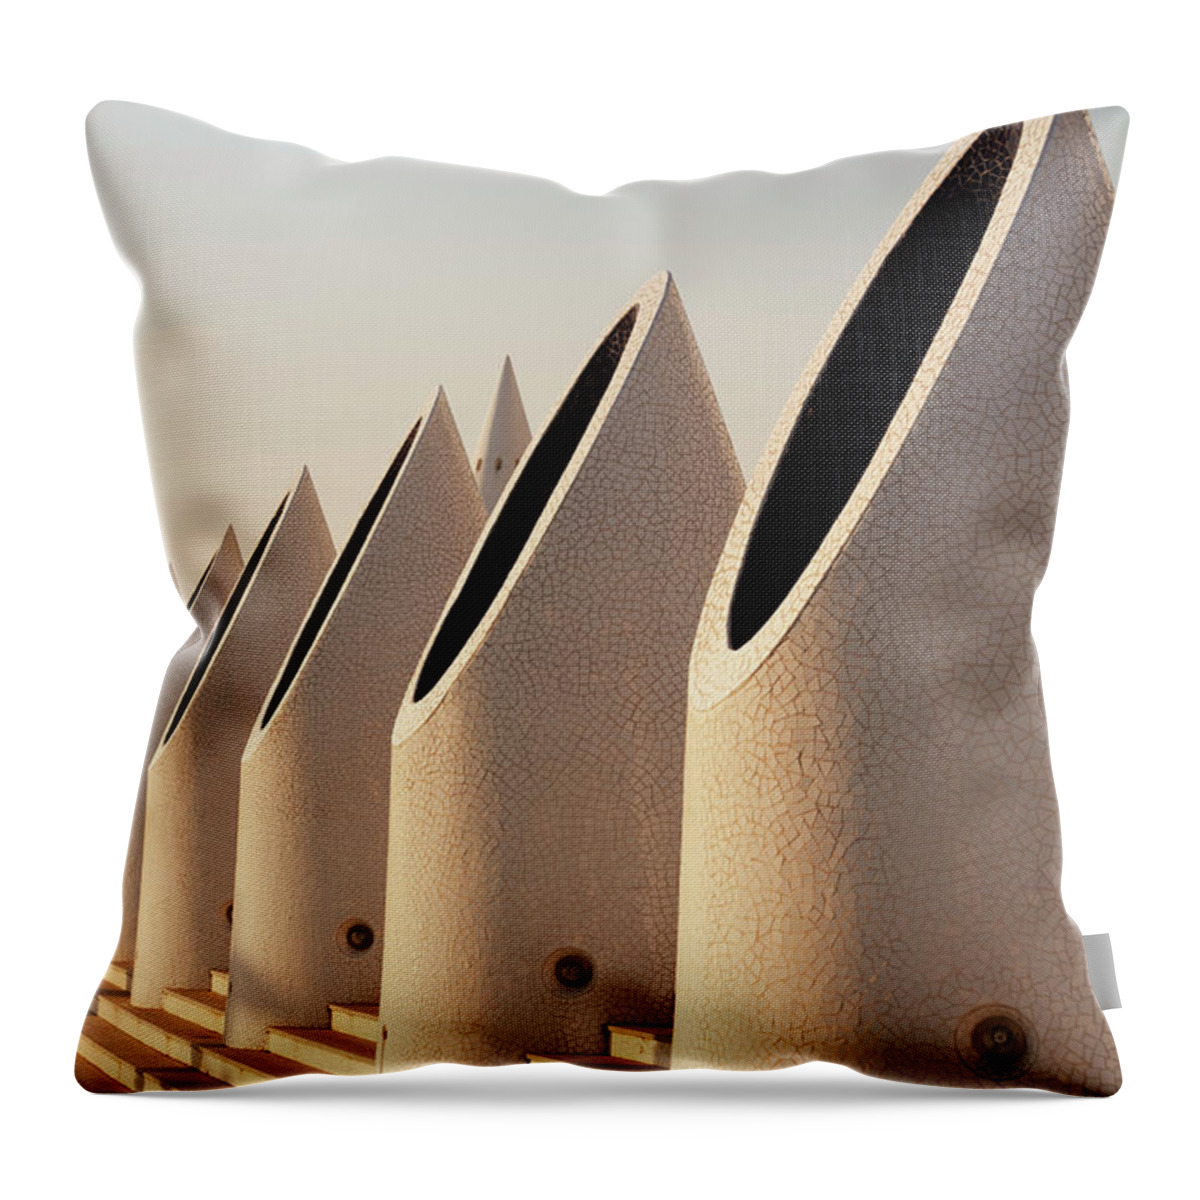 In A Row Throw Pillow featuring the photograph Science Museum In Valencia, Spain #1 by David Clapp